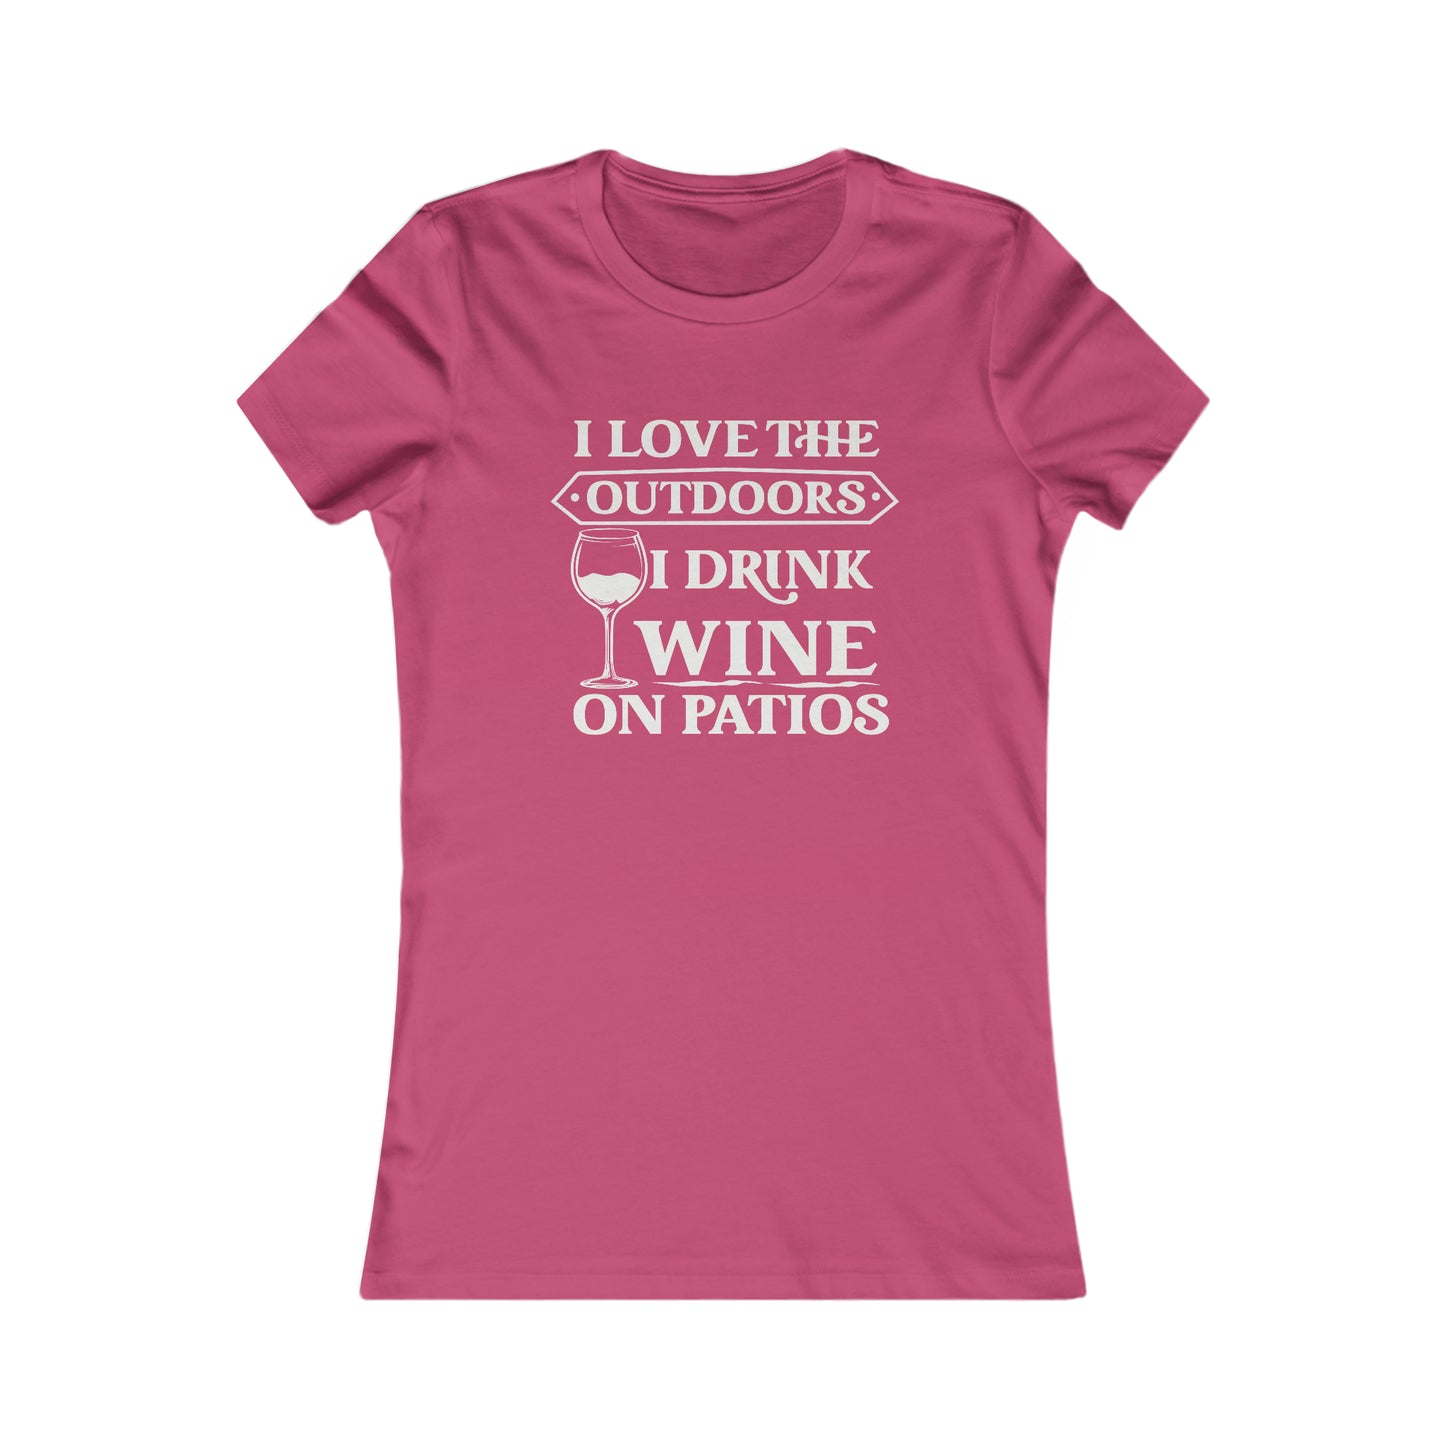 I Love The Outdoors - I Drink Wine On Patios Women's Favorite Tee